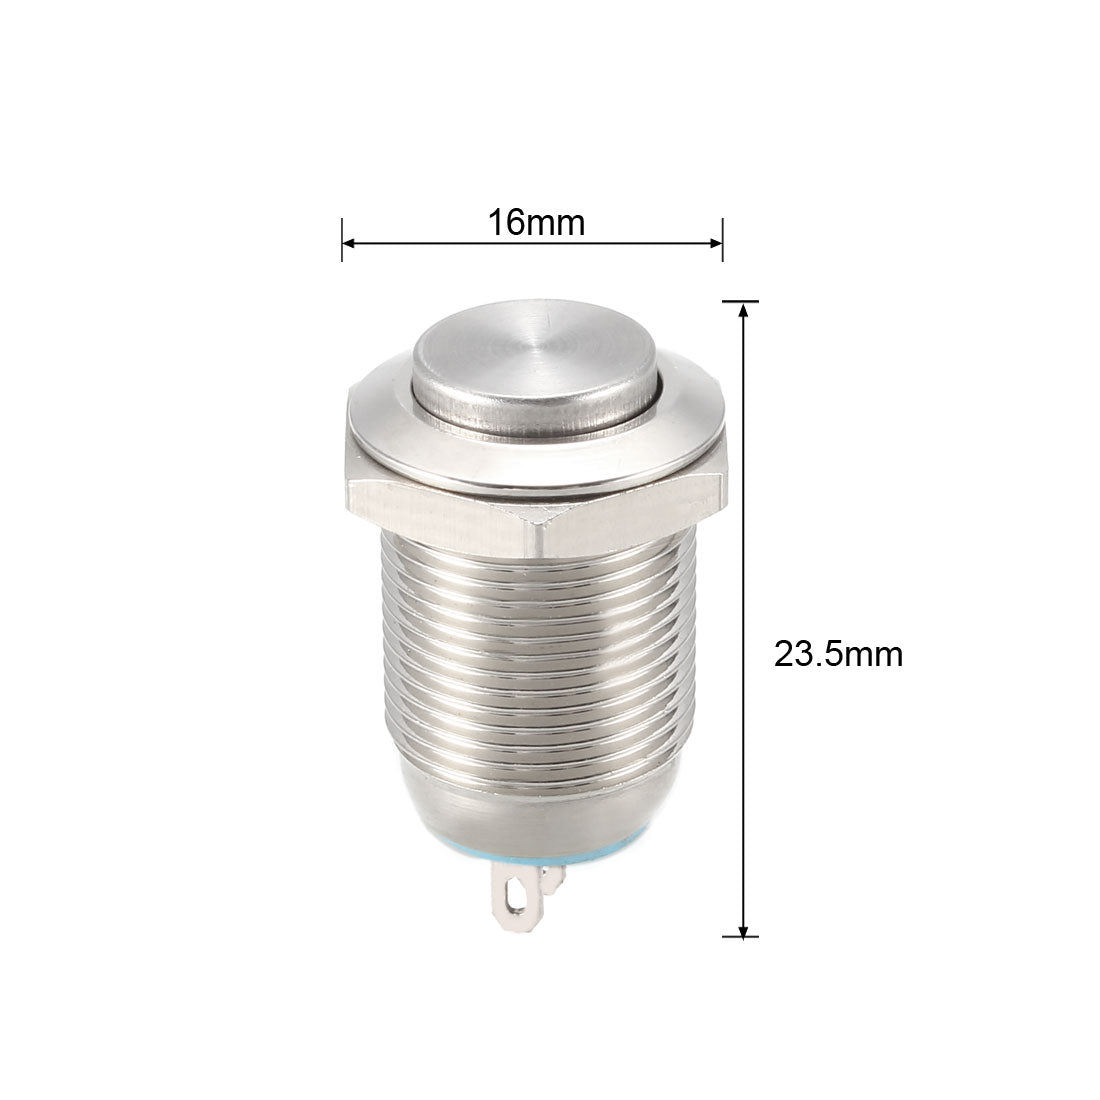 uxcell Uxcell Momentary Metal Push Button Switch 12mm Mounting Dia 1NO 1NC COM DC 30V 0.1A 23.5 x 16mm